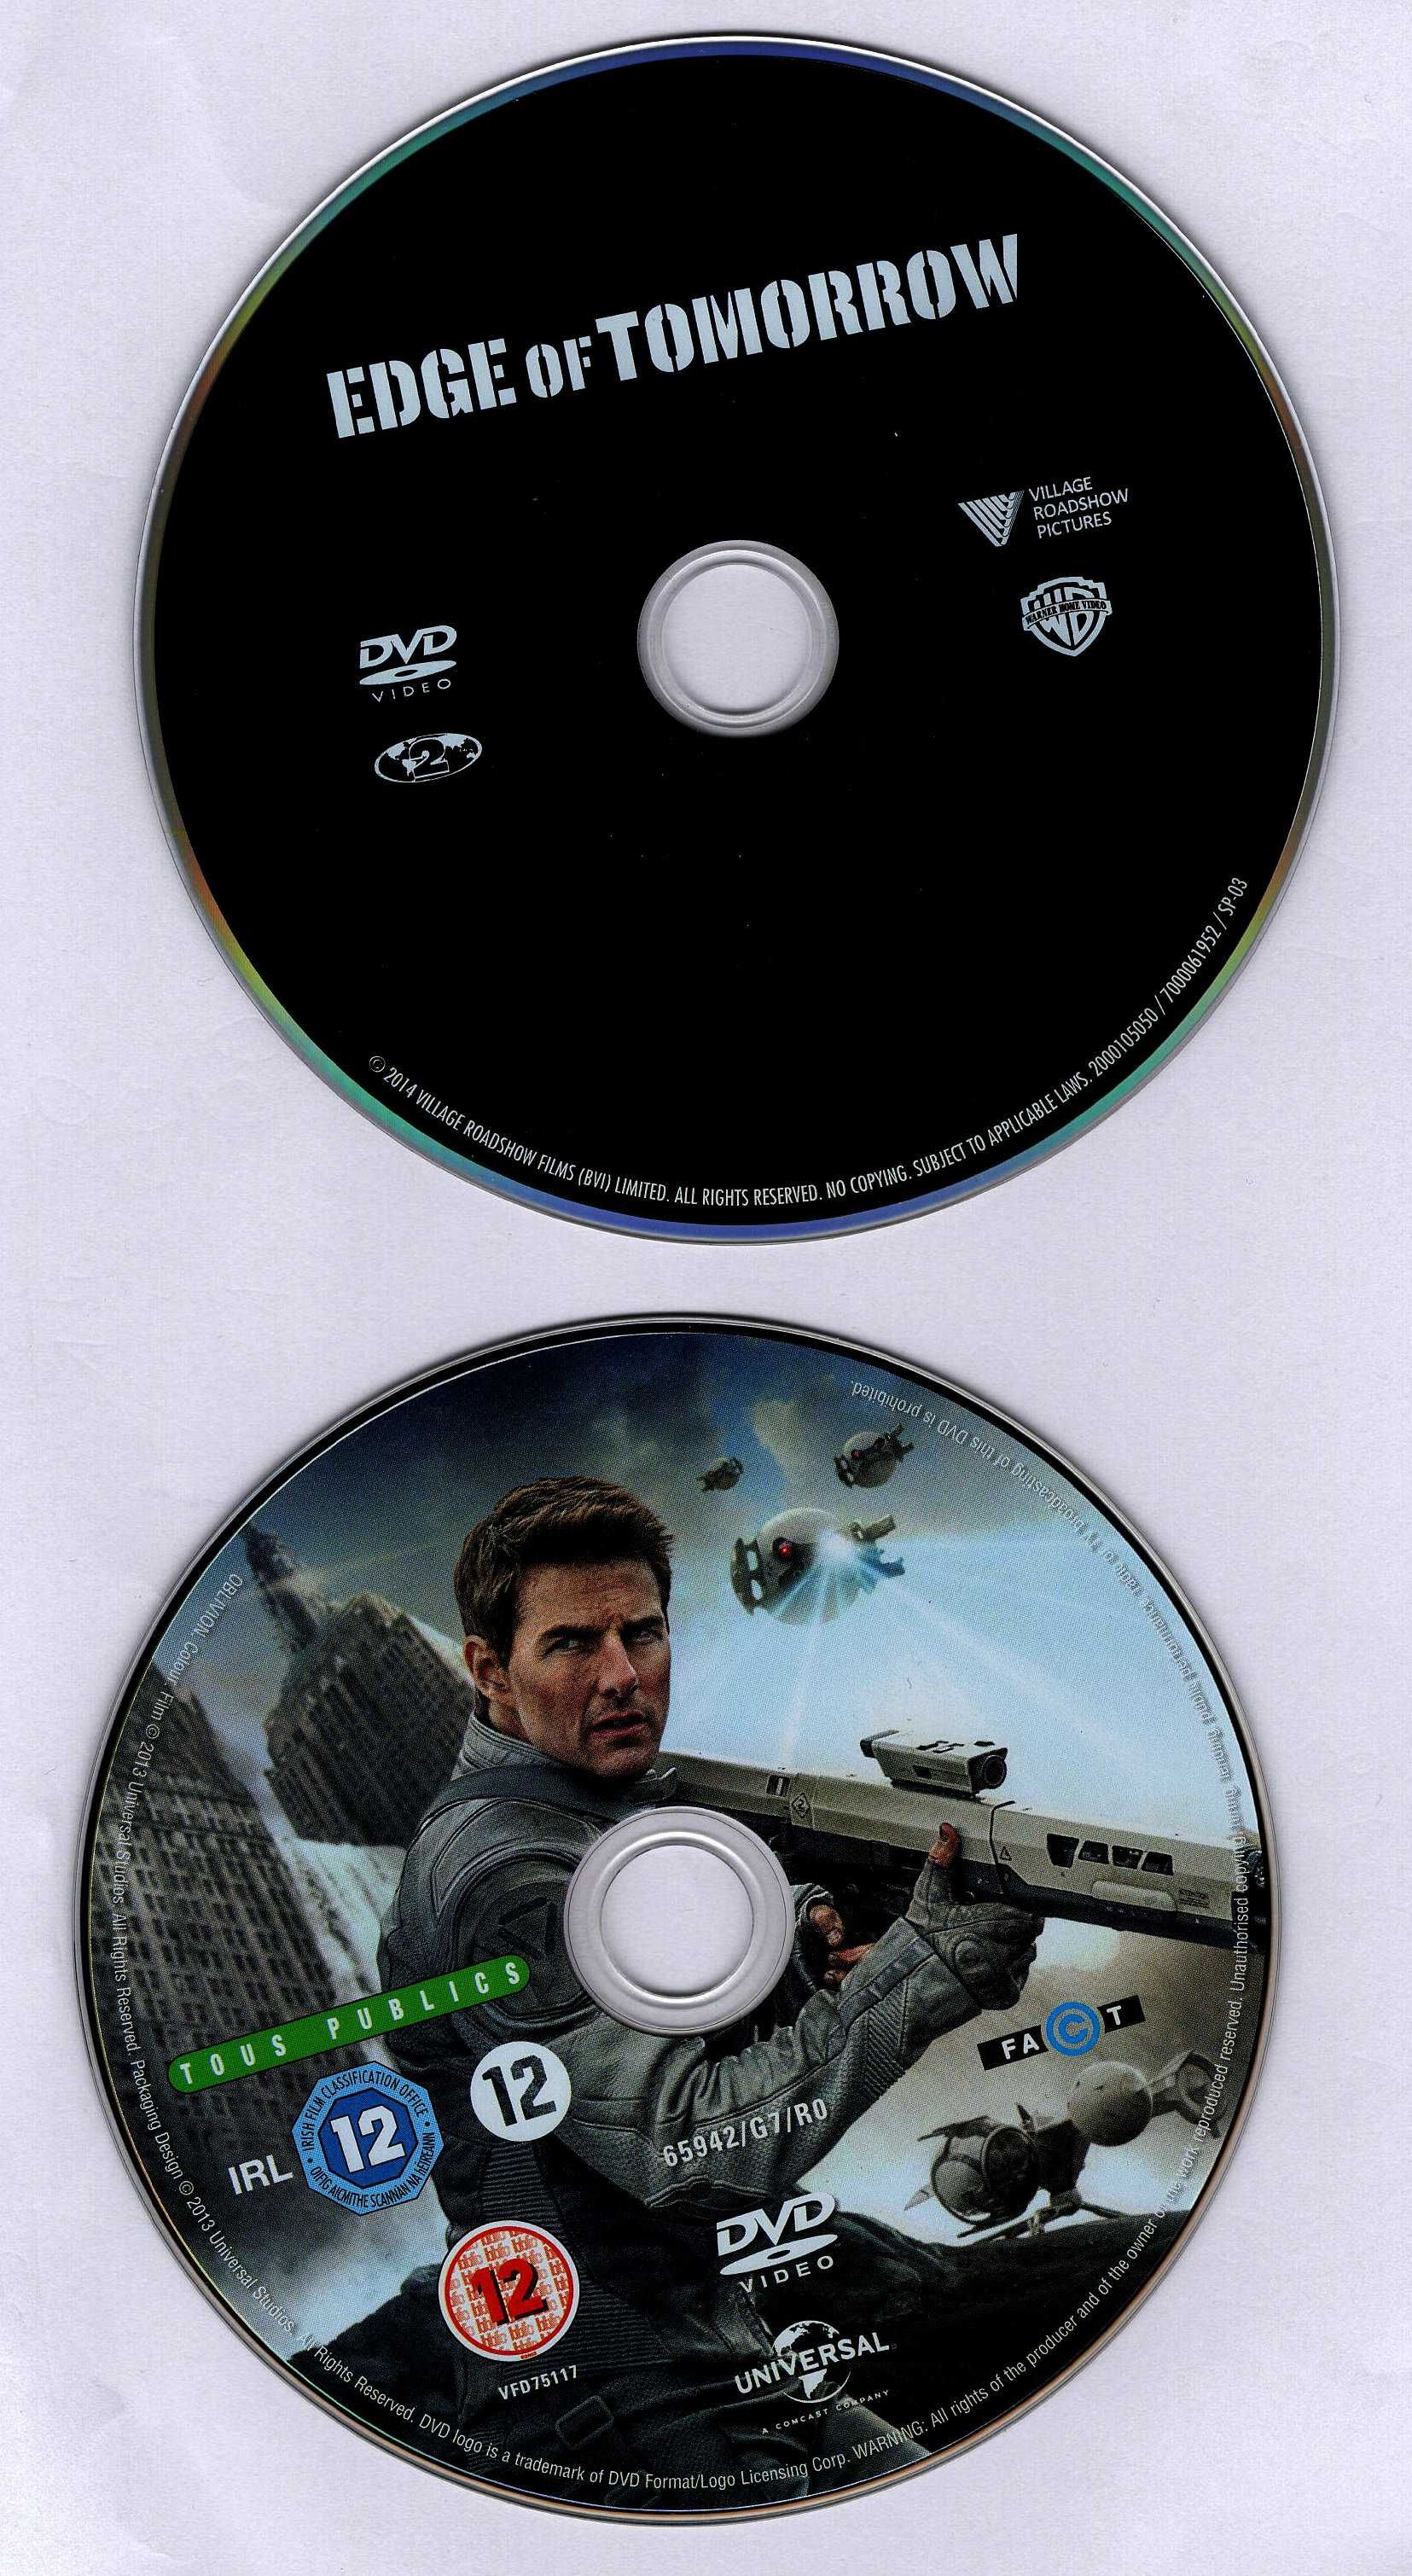 Mission Impossible DVD series  plus Extras